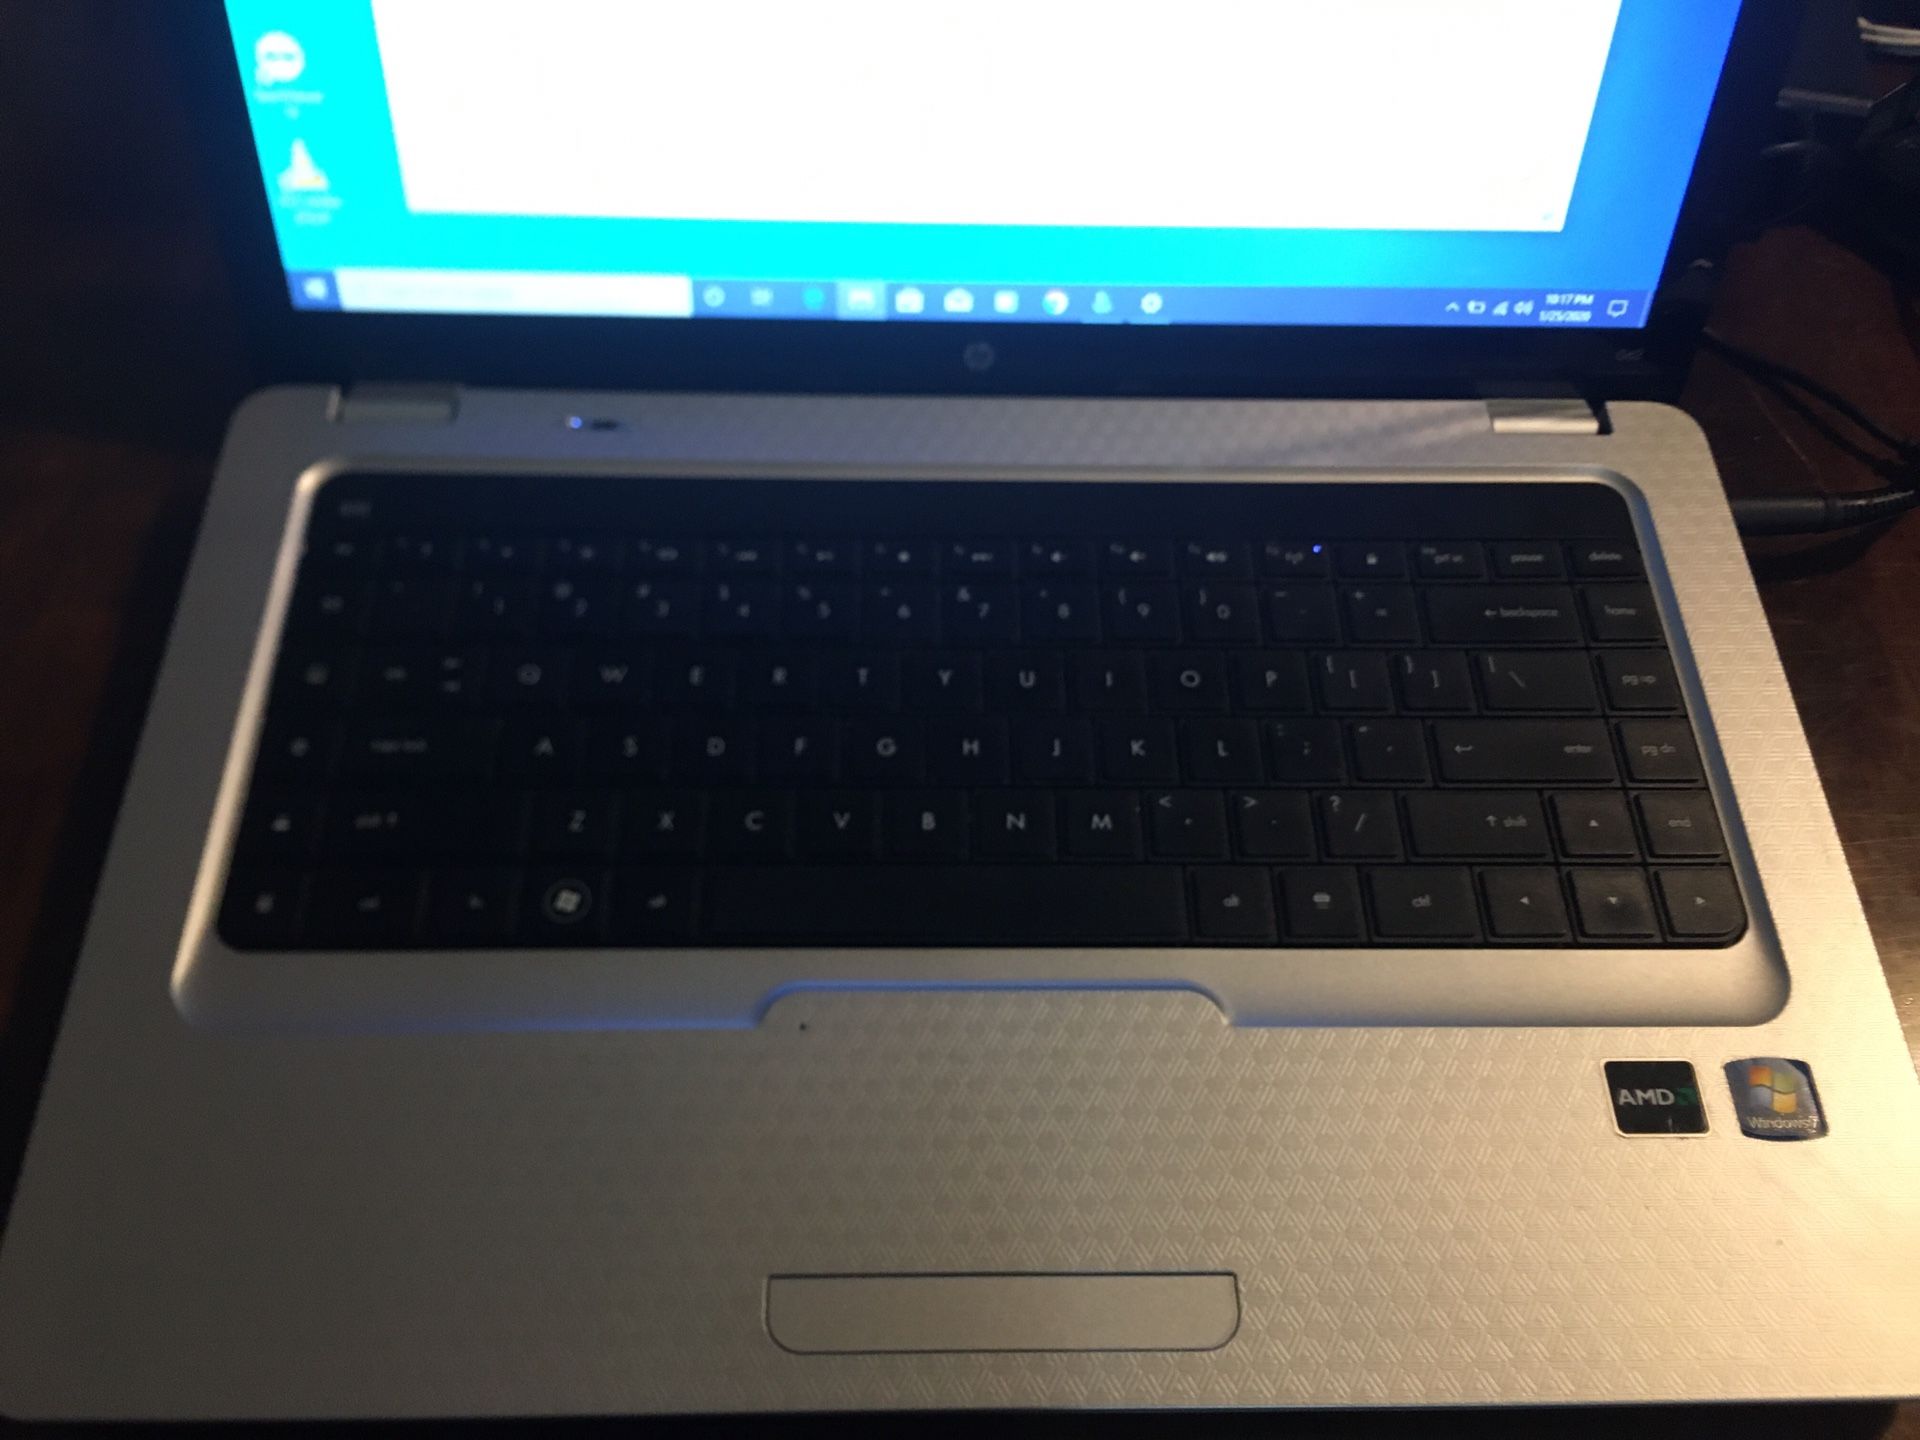 HP G62 laptop with Windows 10 for 80